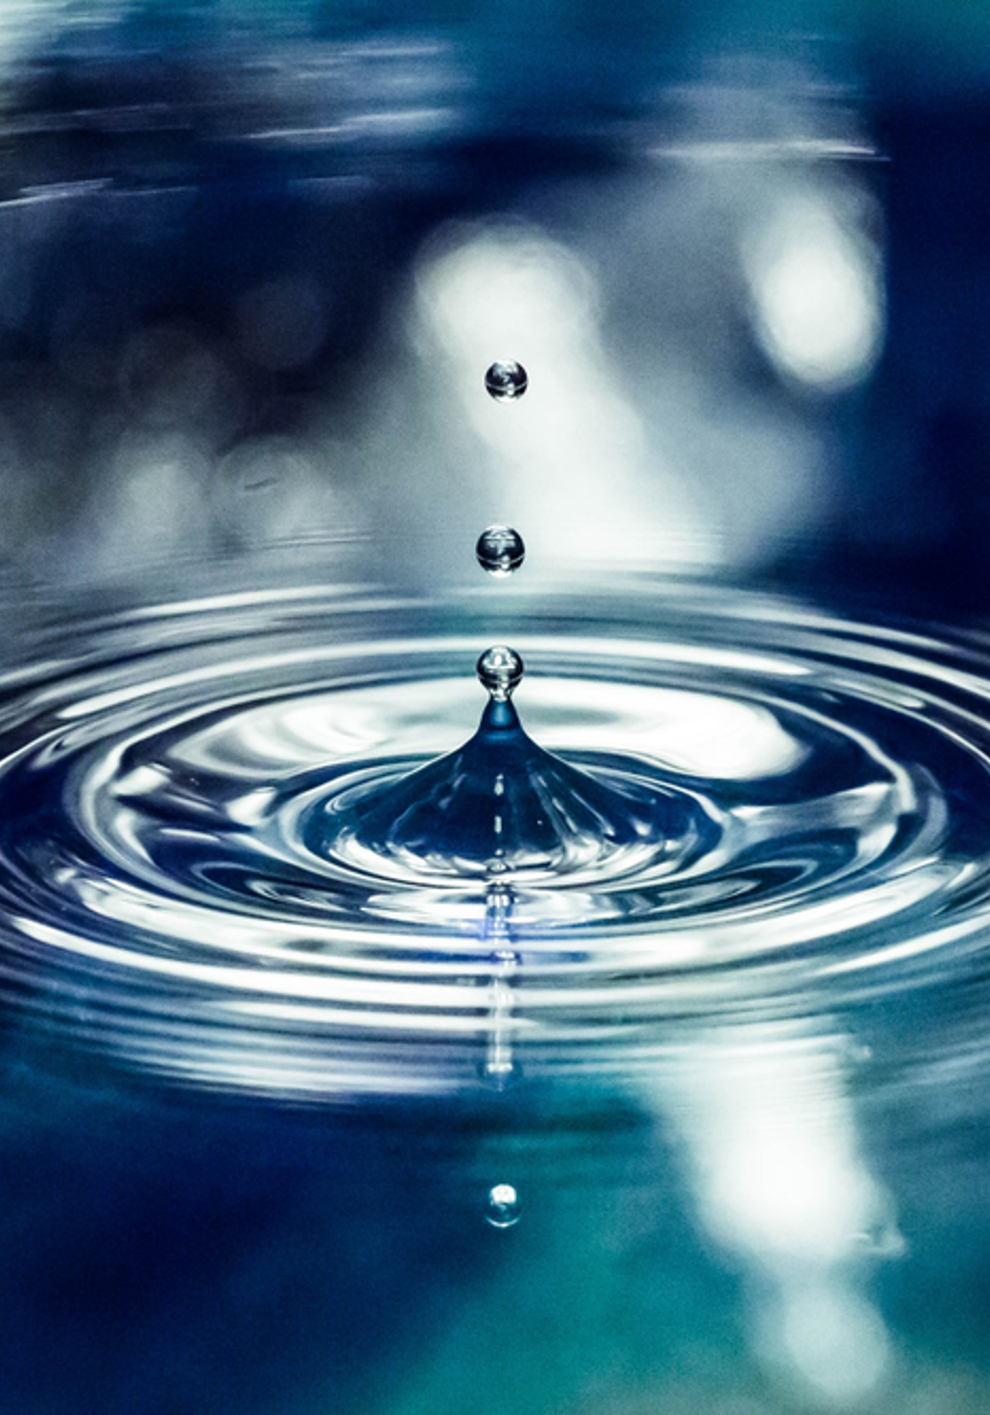  Smart water metering: Making the right decisions